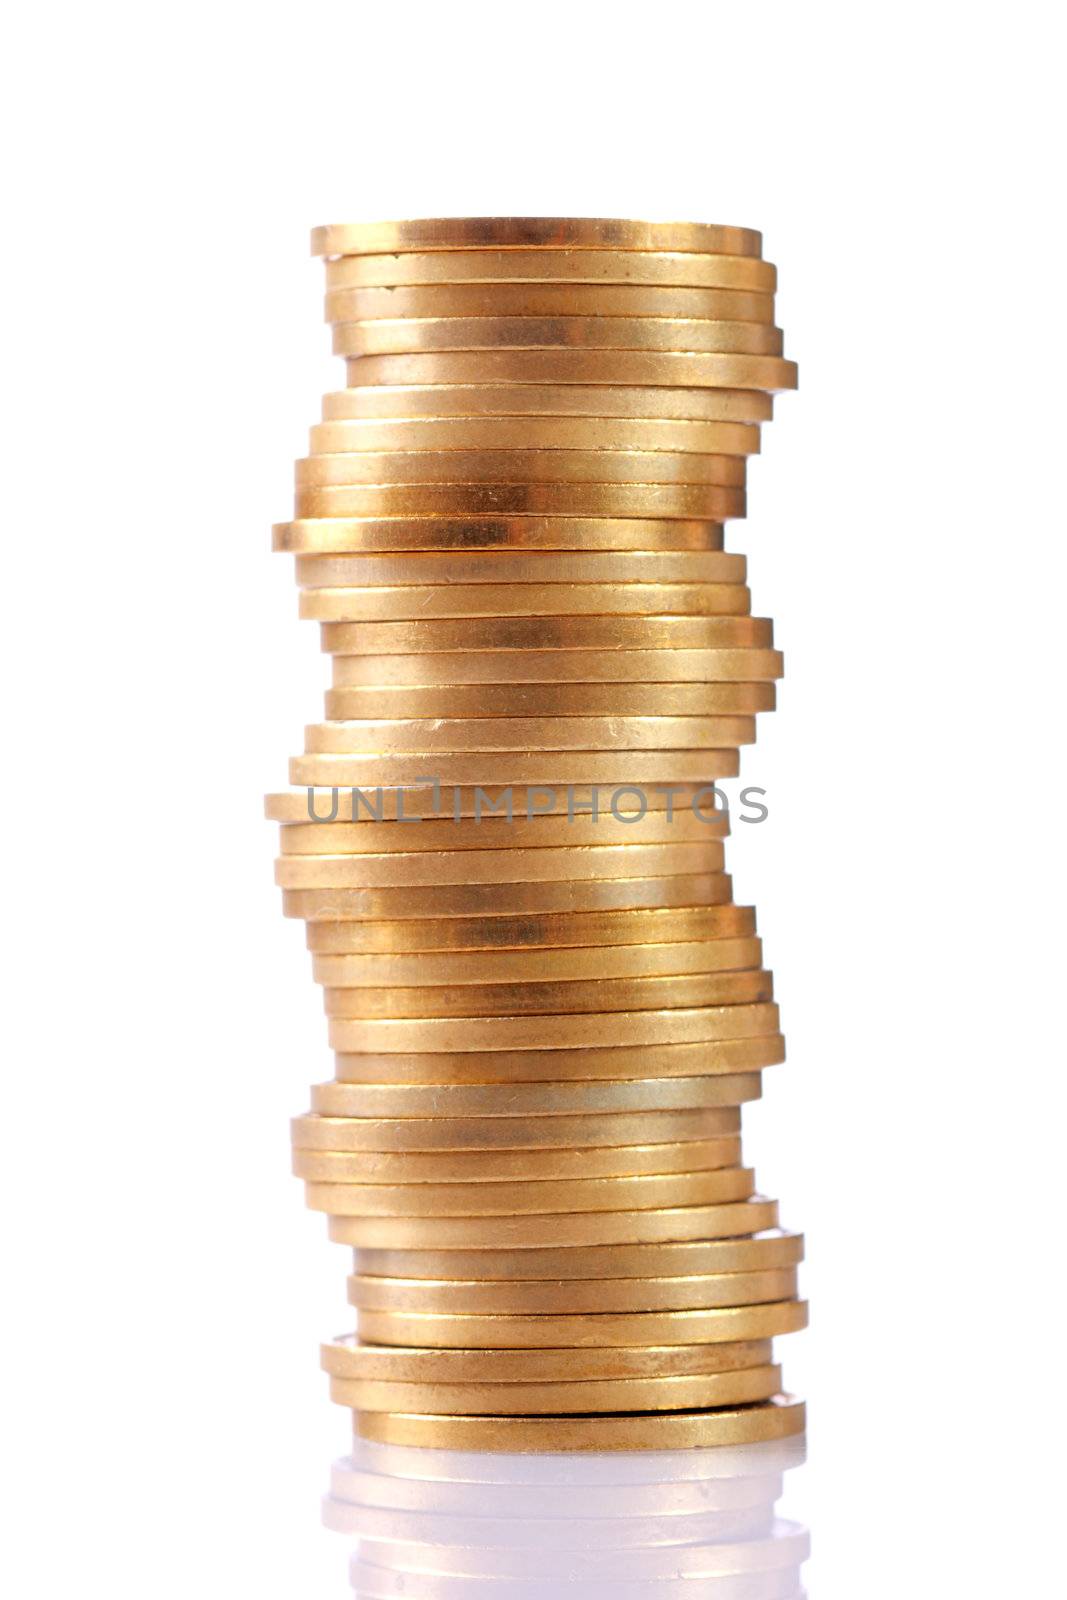 stack of coins by kokimk